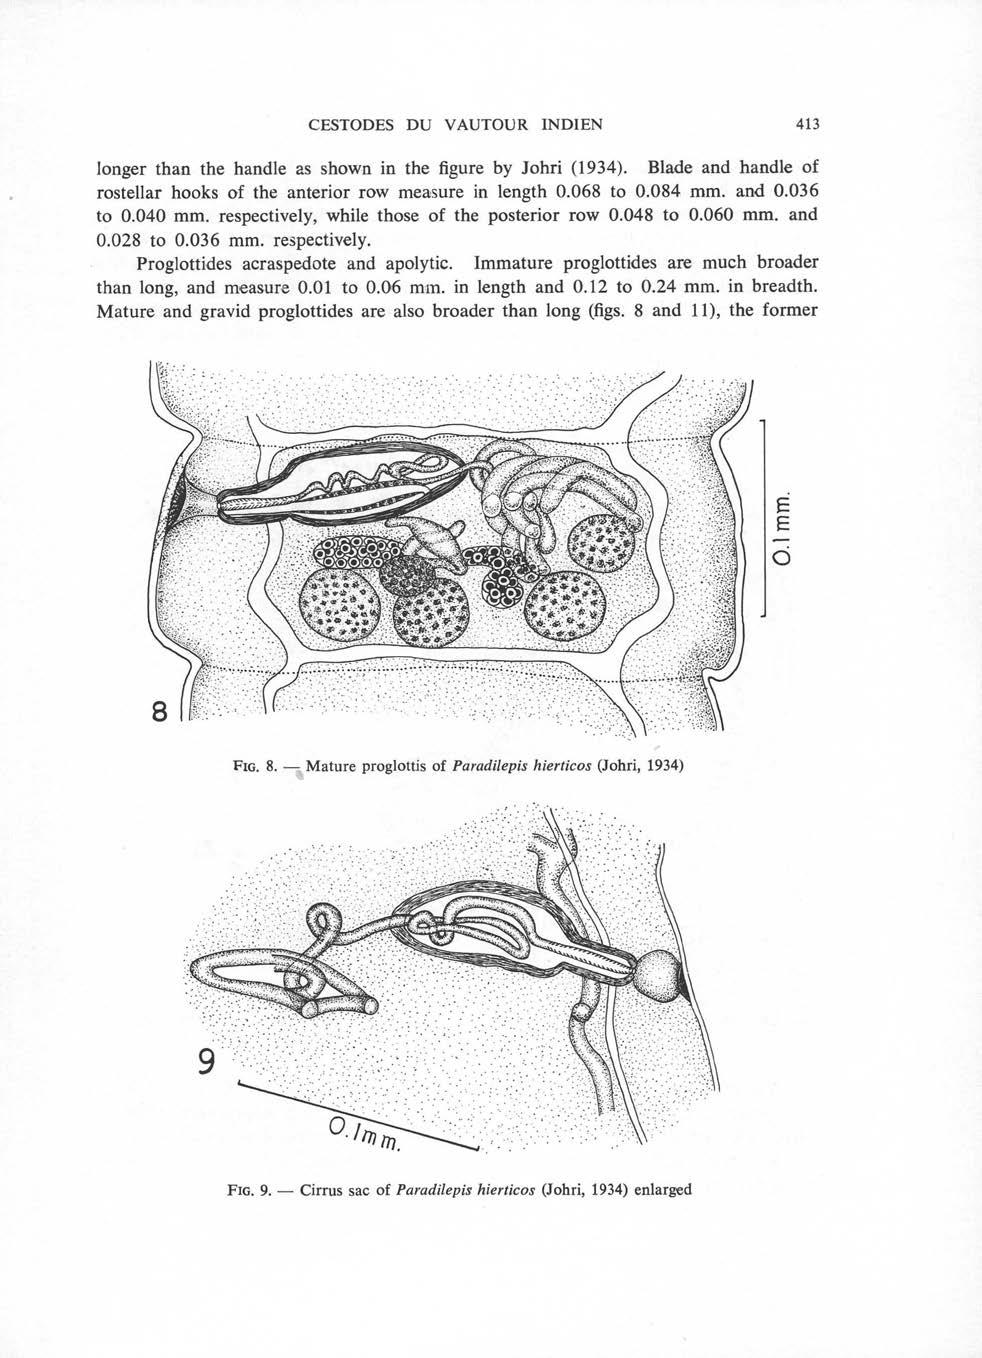 CESTODES DU VAUTOUR INDIEN longer than the handle as shown in the figure by Johri (1934). Blade and handle of rostellar hooks of the anterior row measure in length 0.068 to 0.084 mm. and 0.036 to 0.